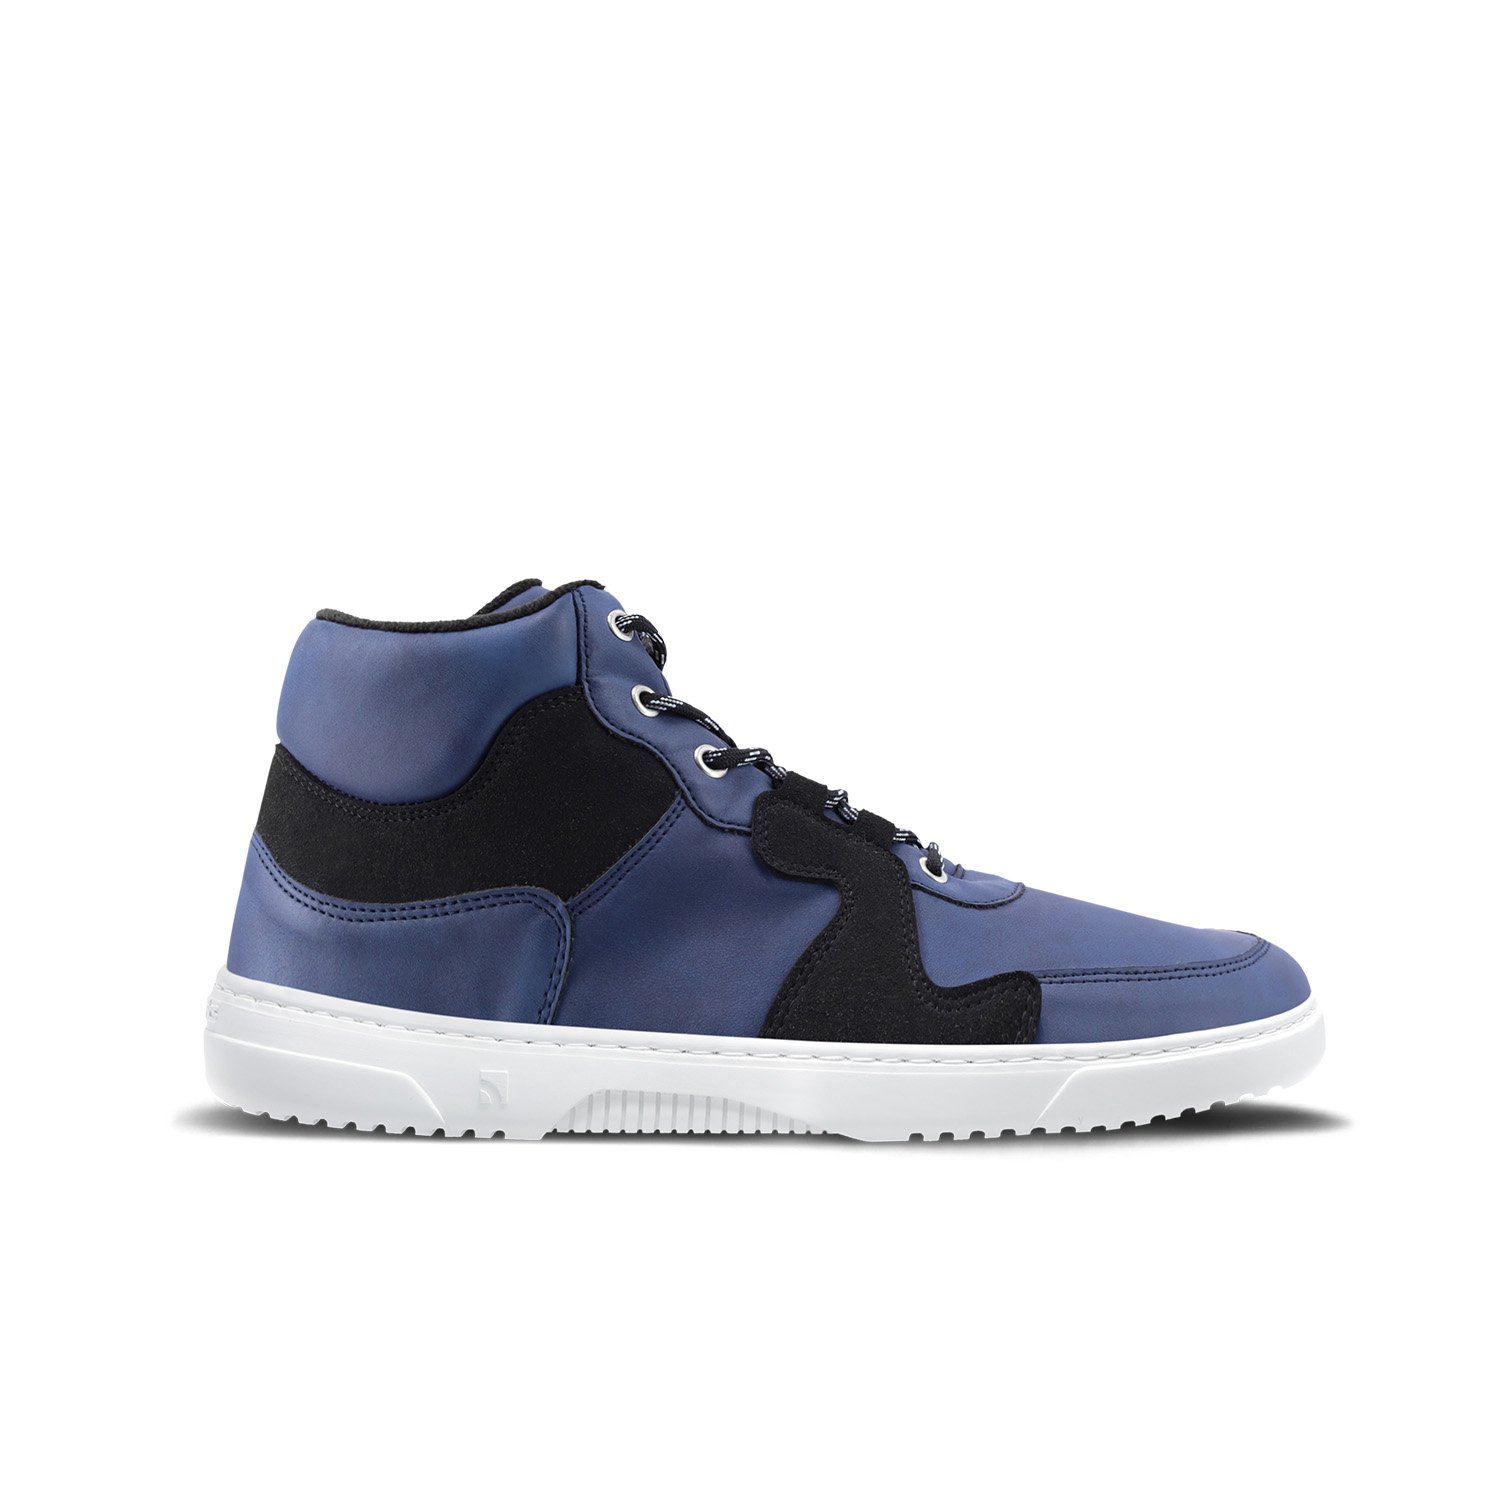 Louis Vuitton High Top Suede Crafted Sneaker Bluee